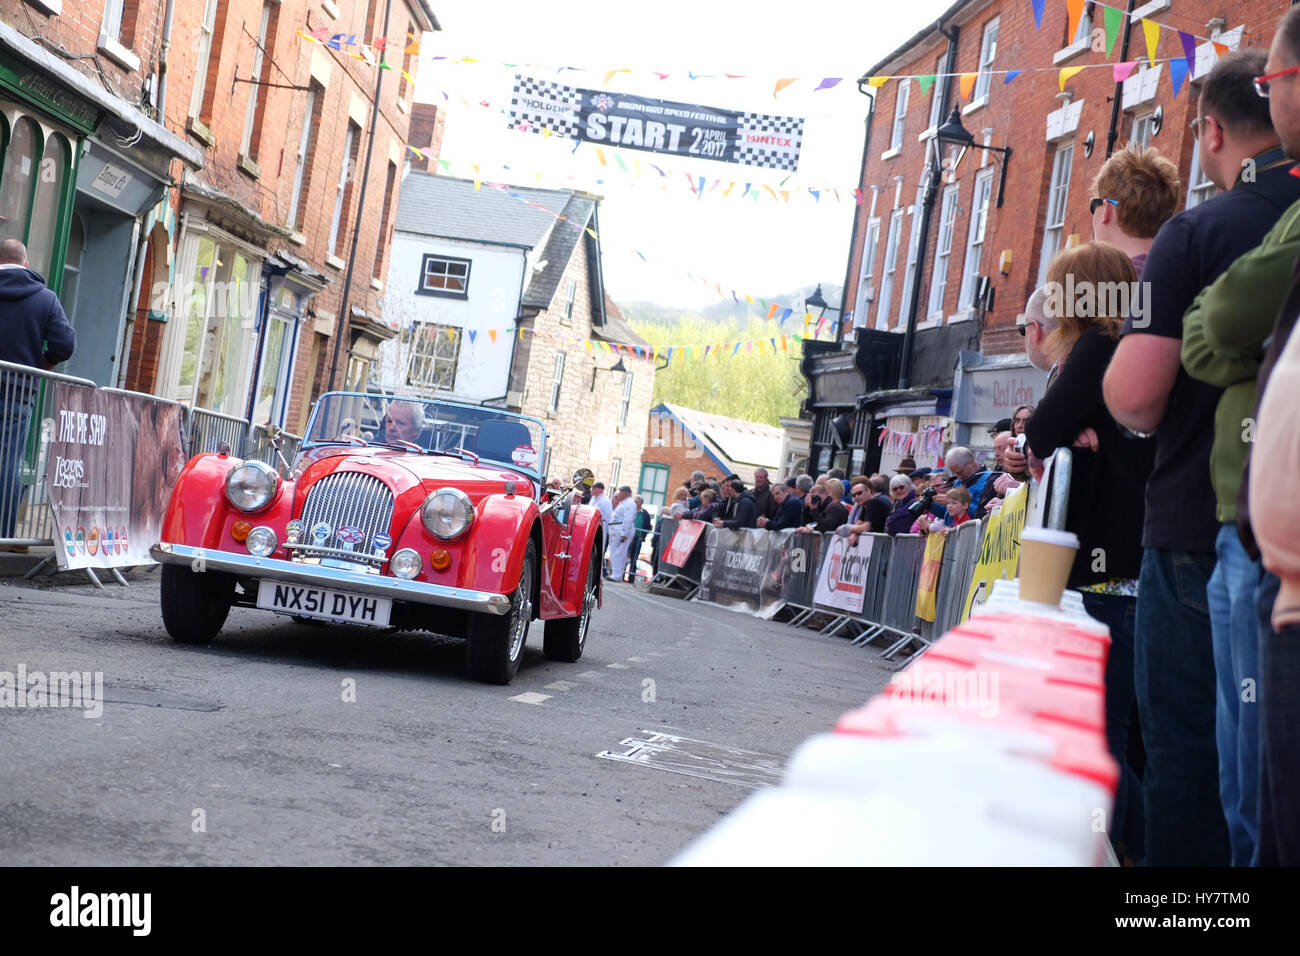 Bromyard Speed Festival, Herefordshire, UK - April 2017 - Vintage and classic cars roar through the town centre of Bromyard as fans watch at Bromyard for the 2nd Speed Festival. The photo shows a Morgan sports car. Photo Steven May / Alamy Live News Stock Photo